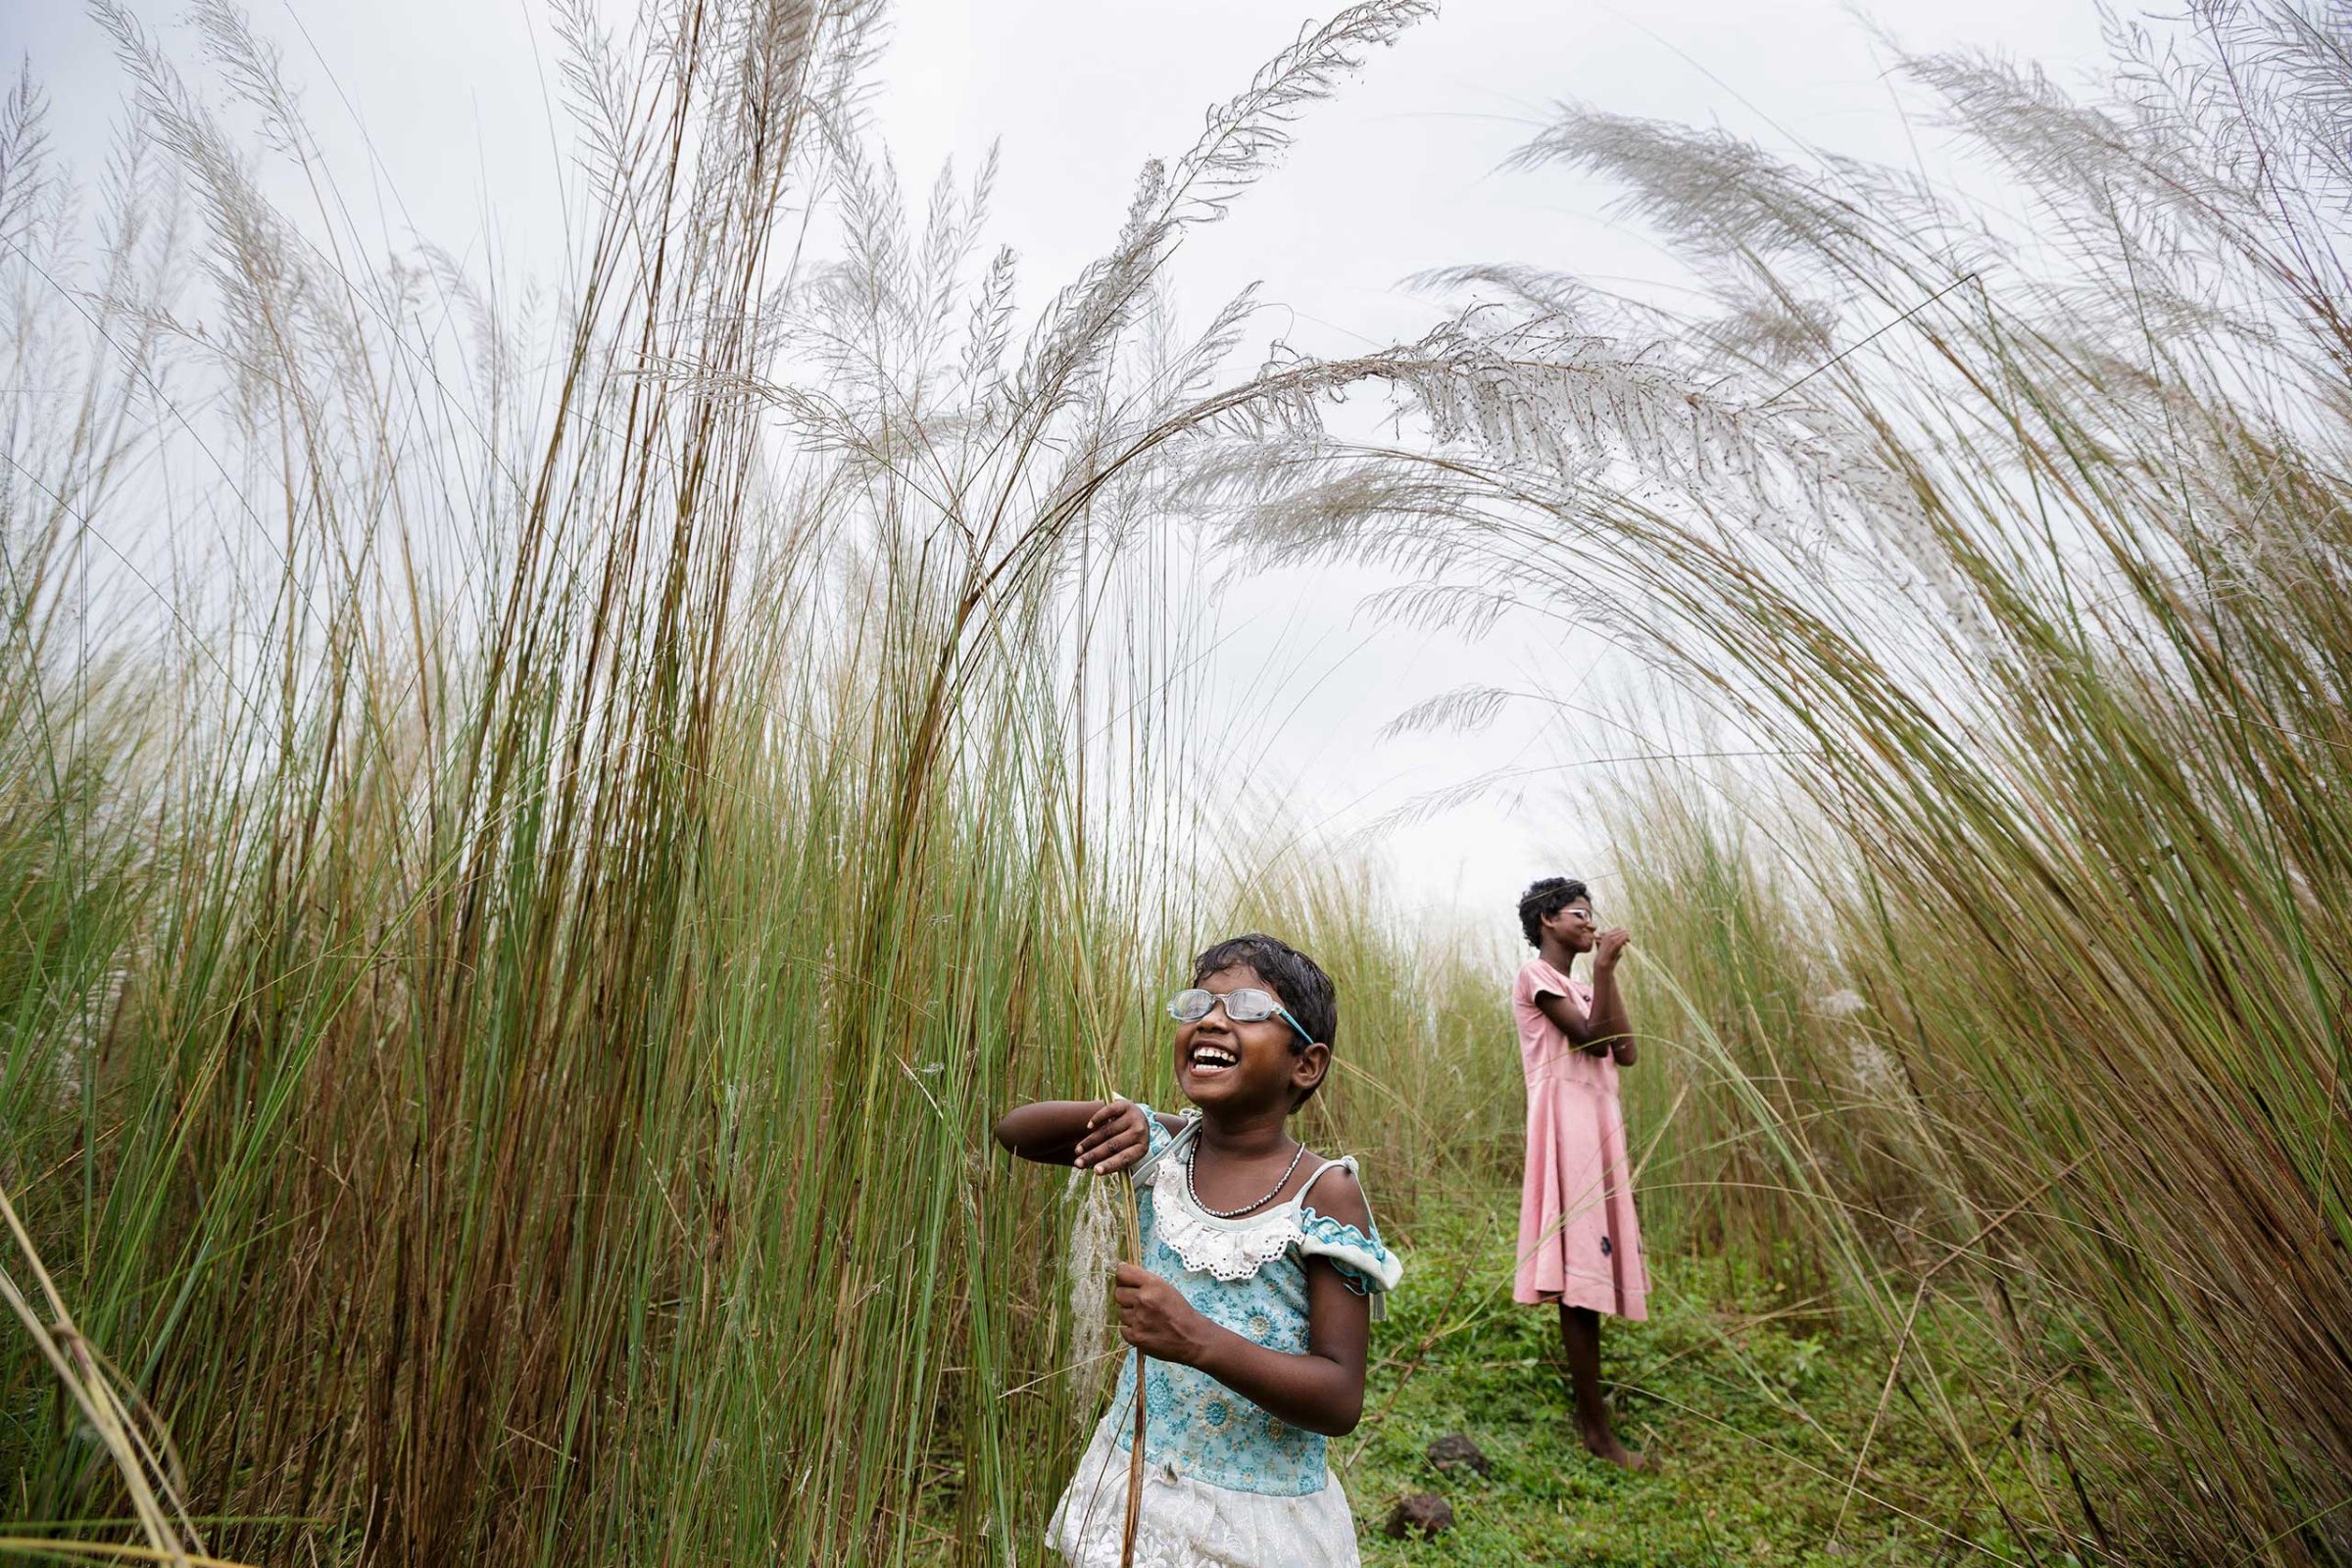 Anita and Sonia explore some of their first sensations of sight after their surgery, as they walk through bulrushes near their village, Oct. 28, 2013 in West Bengal, India.